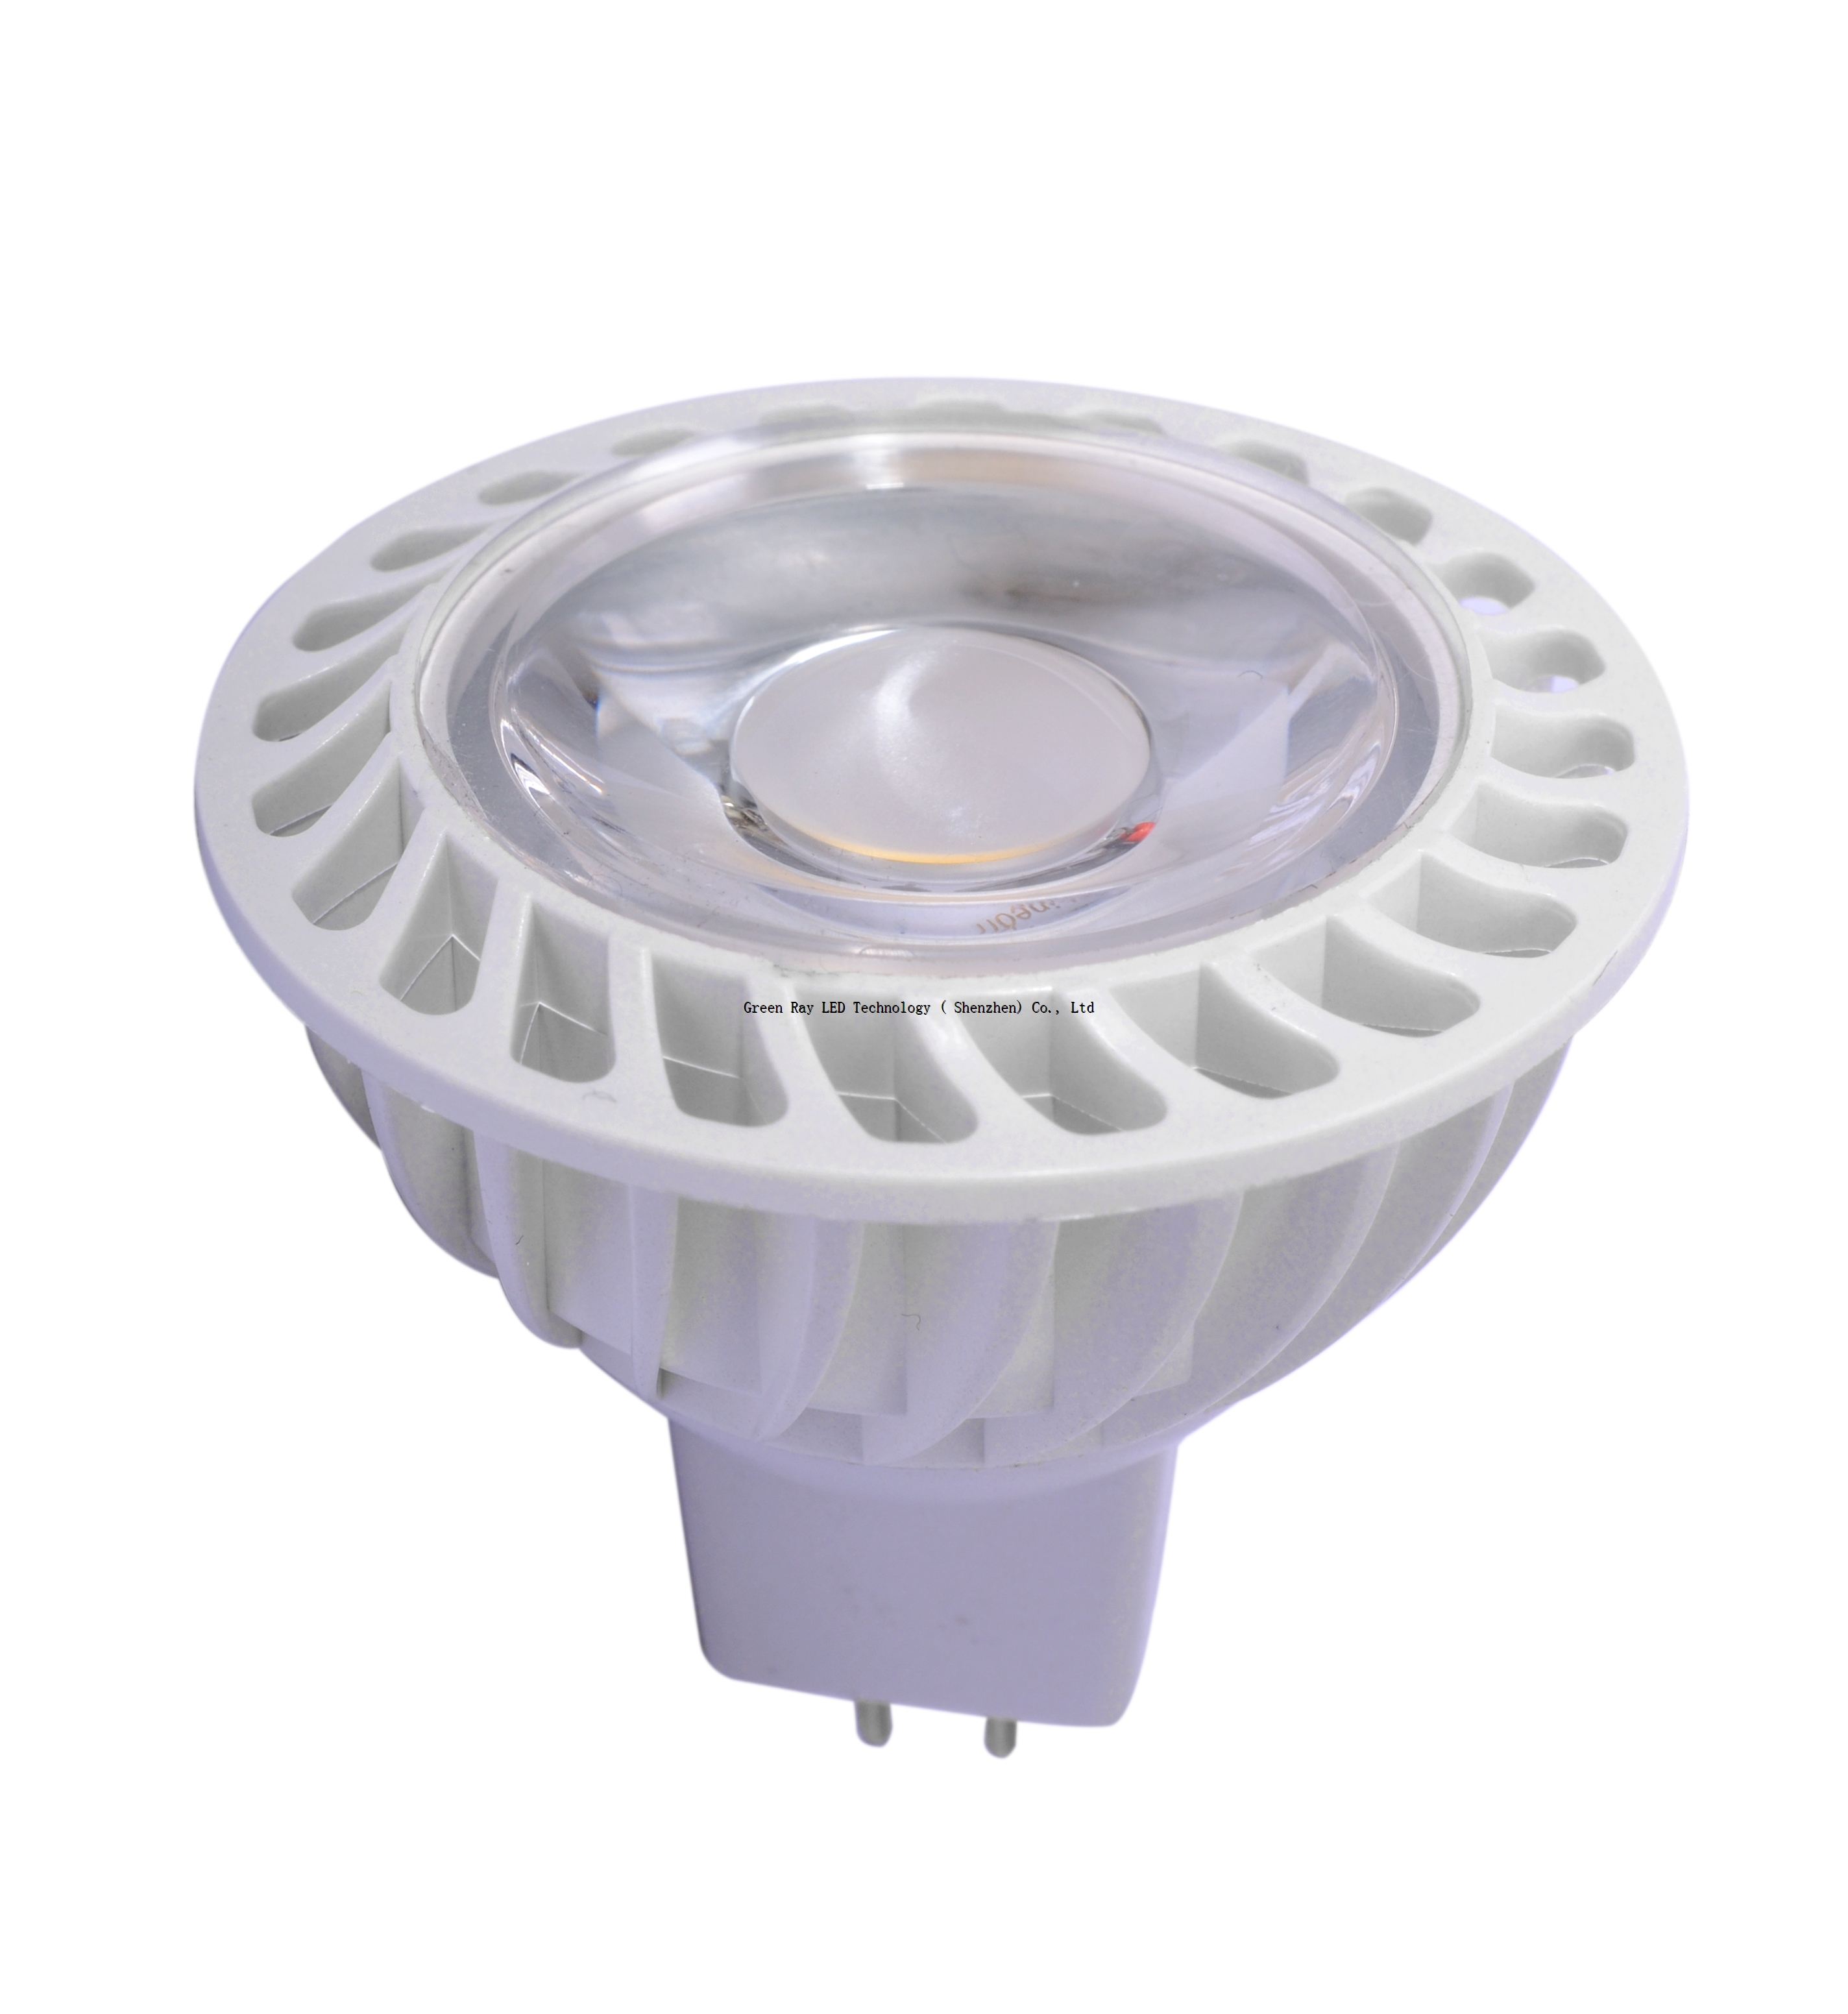 MR16 led spot light, 4W dimmable, COB, high efficiency, long lifespan 50,000Hours